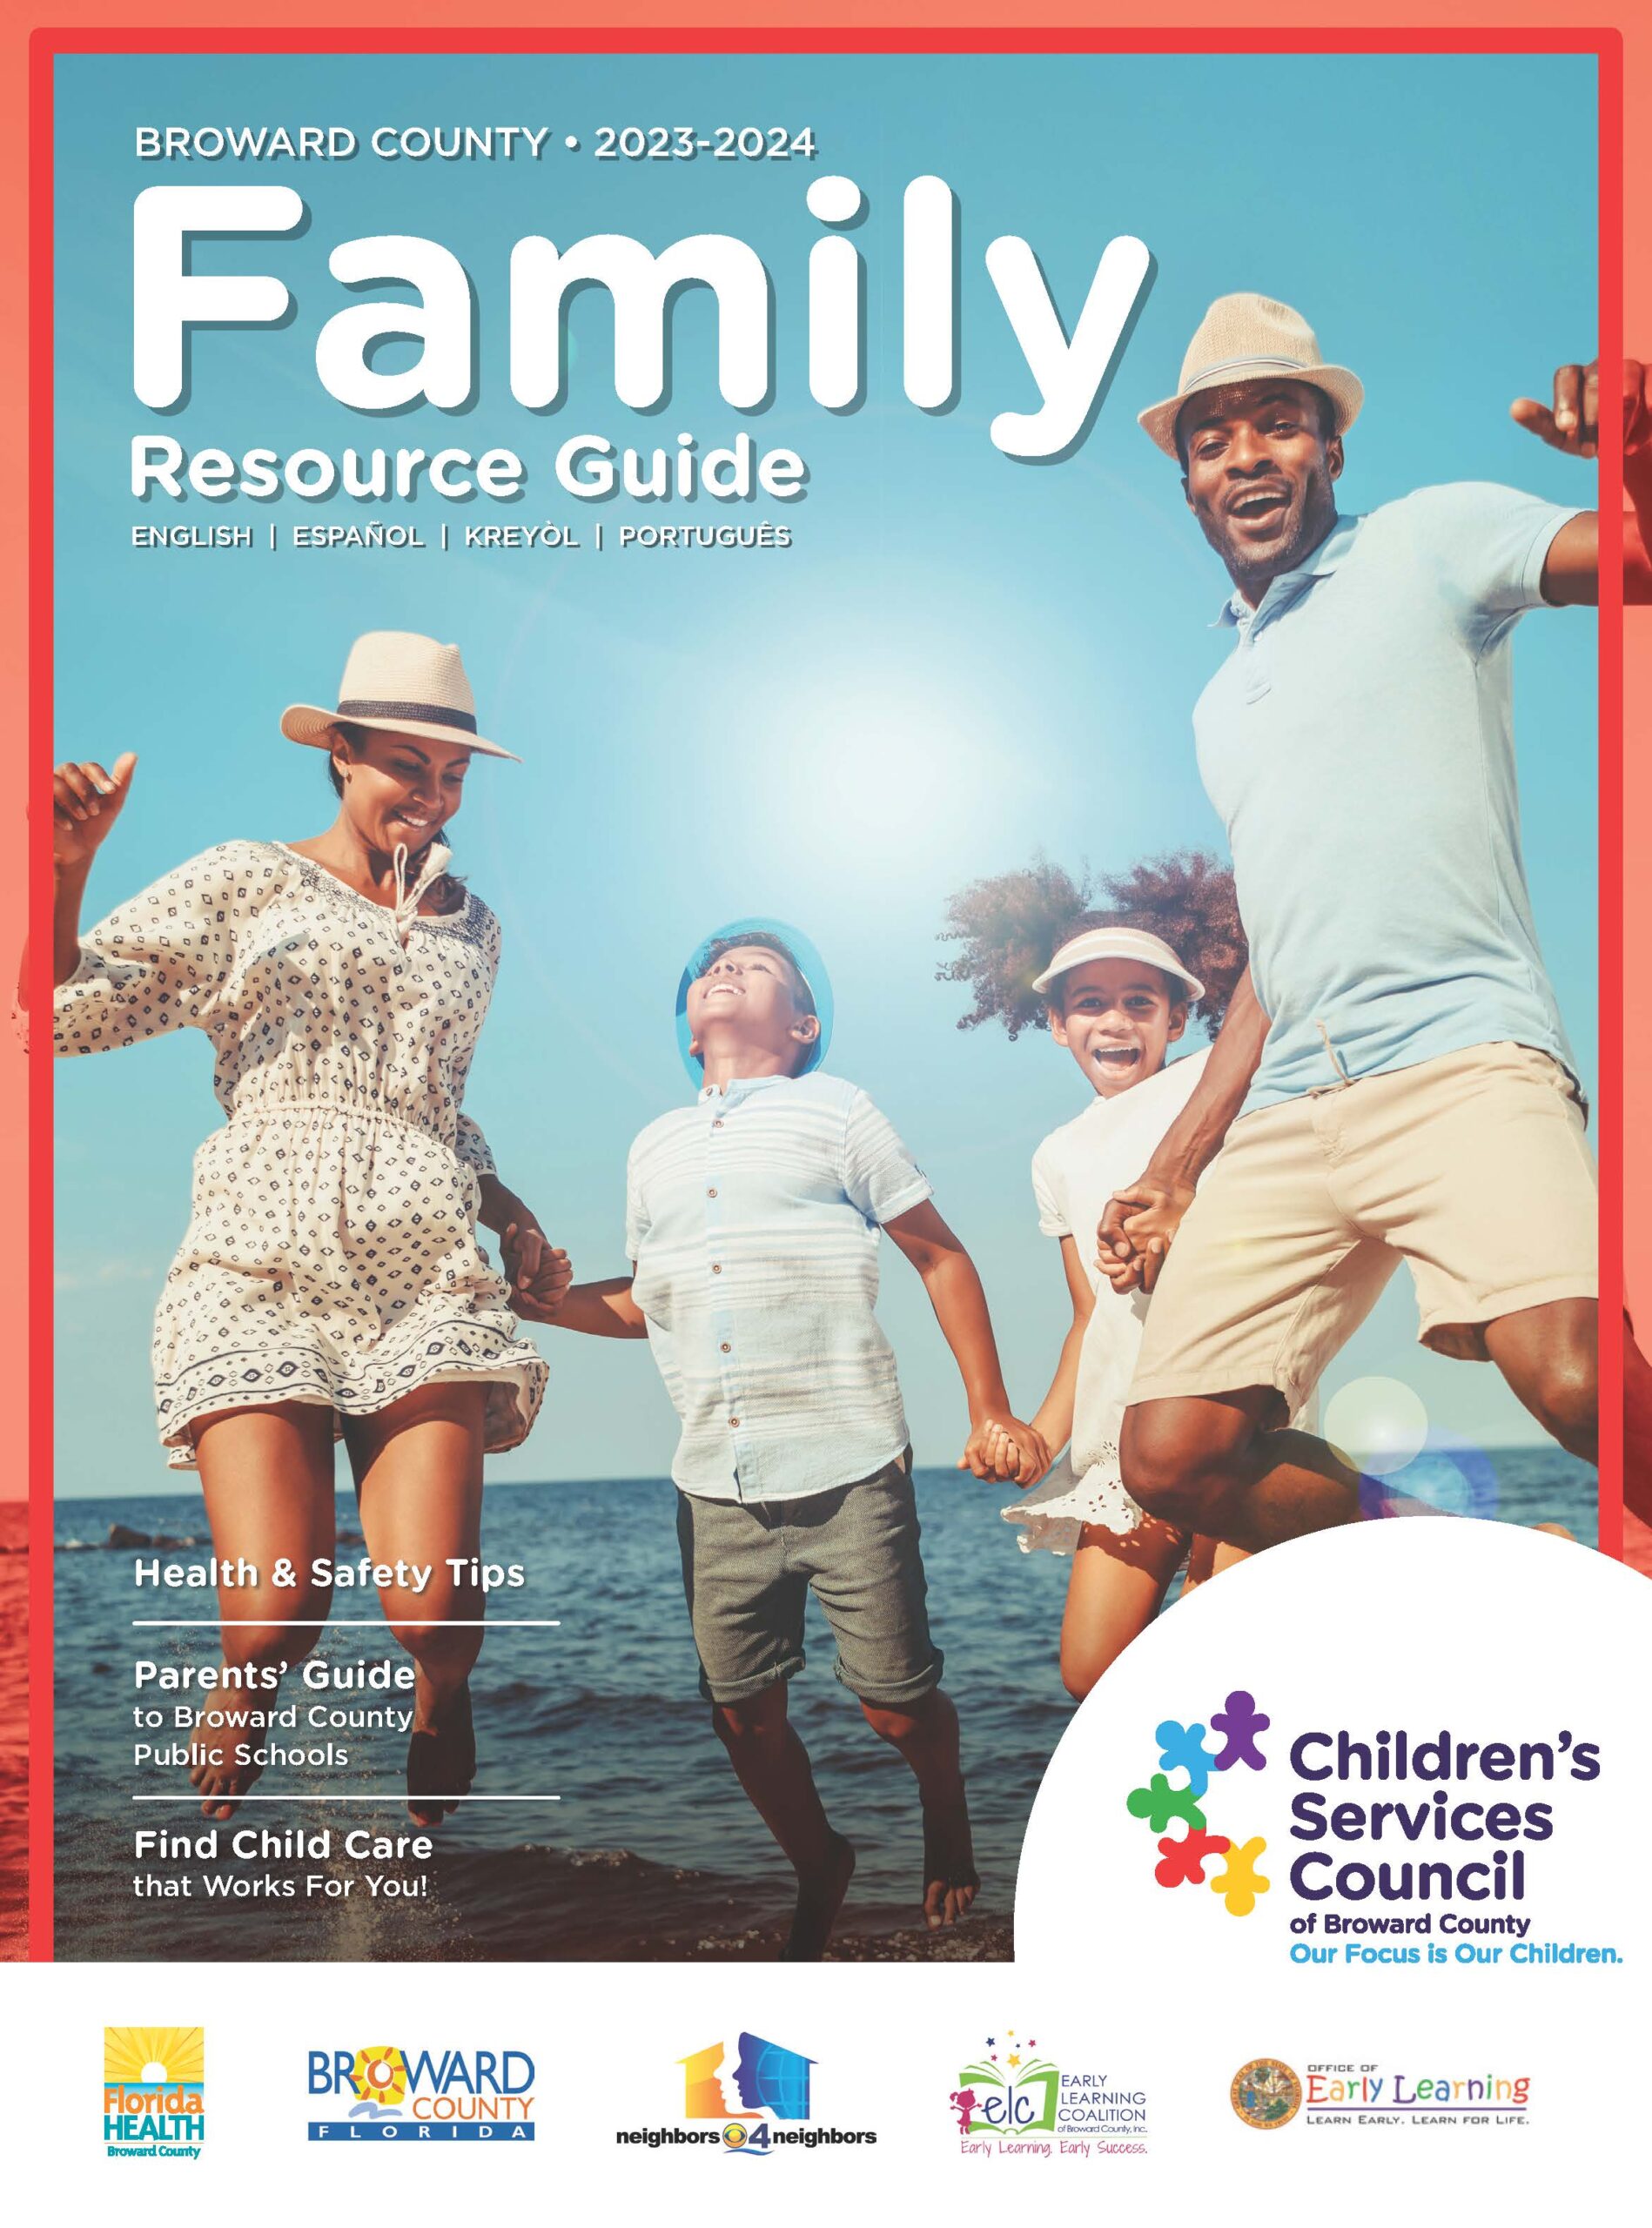 Family Resource Guide: 2023-2024